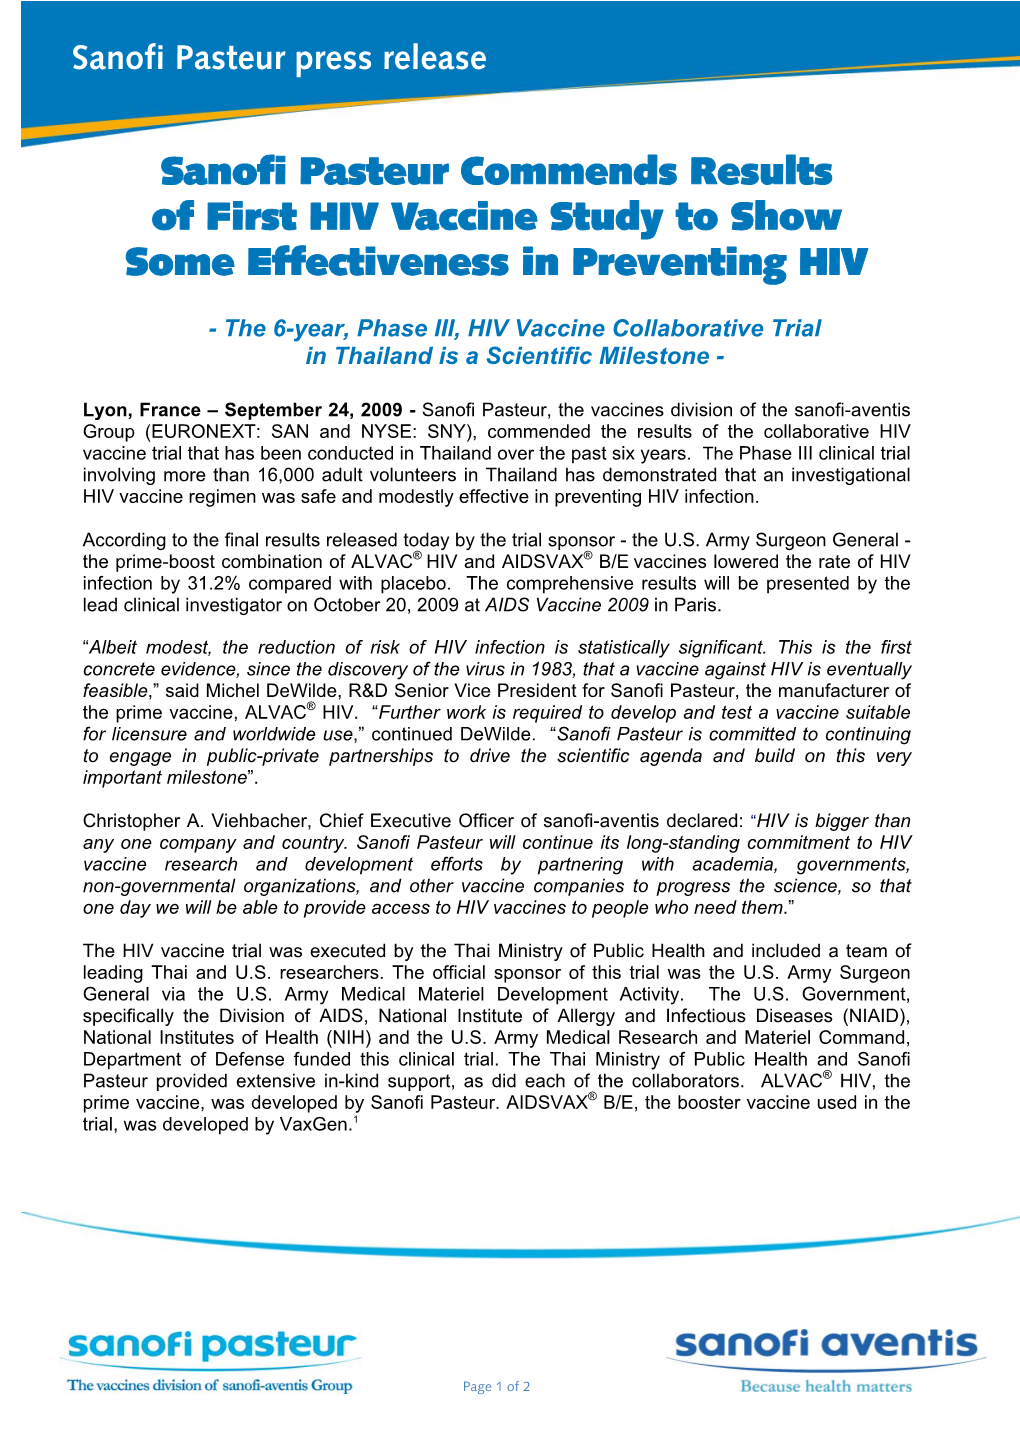 Sanofi Pasteur Commends Results of First HIV Vaccine Study to Show Some Effectiveness in Preventing HIV